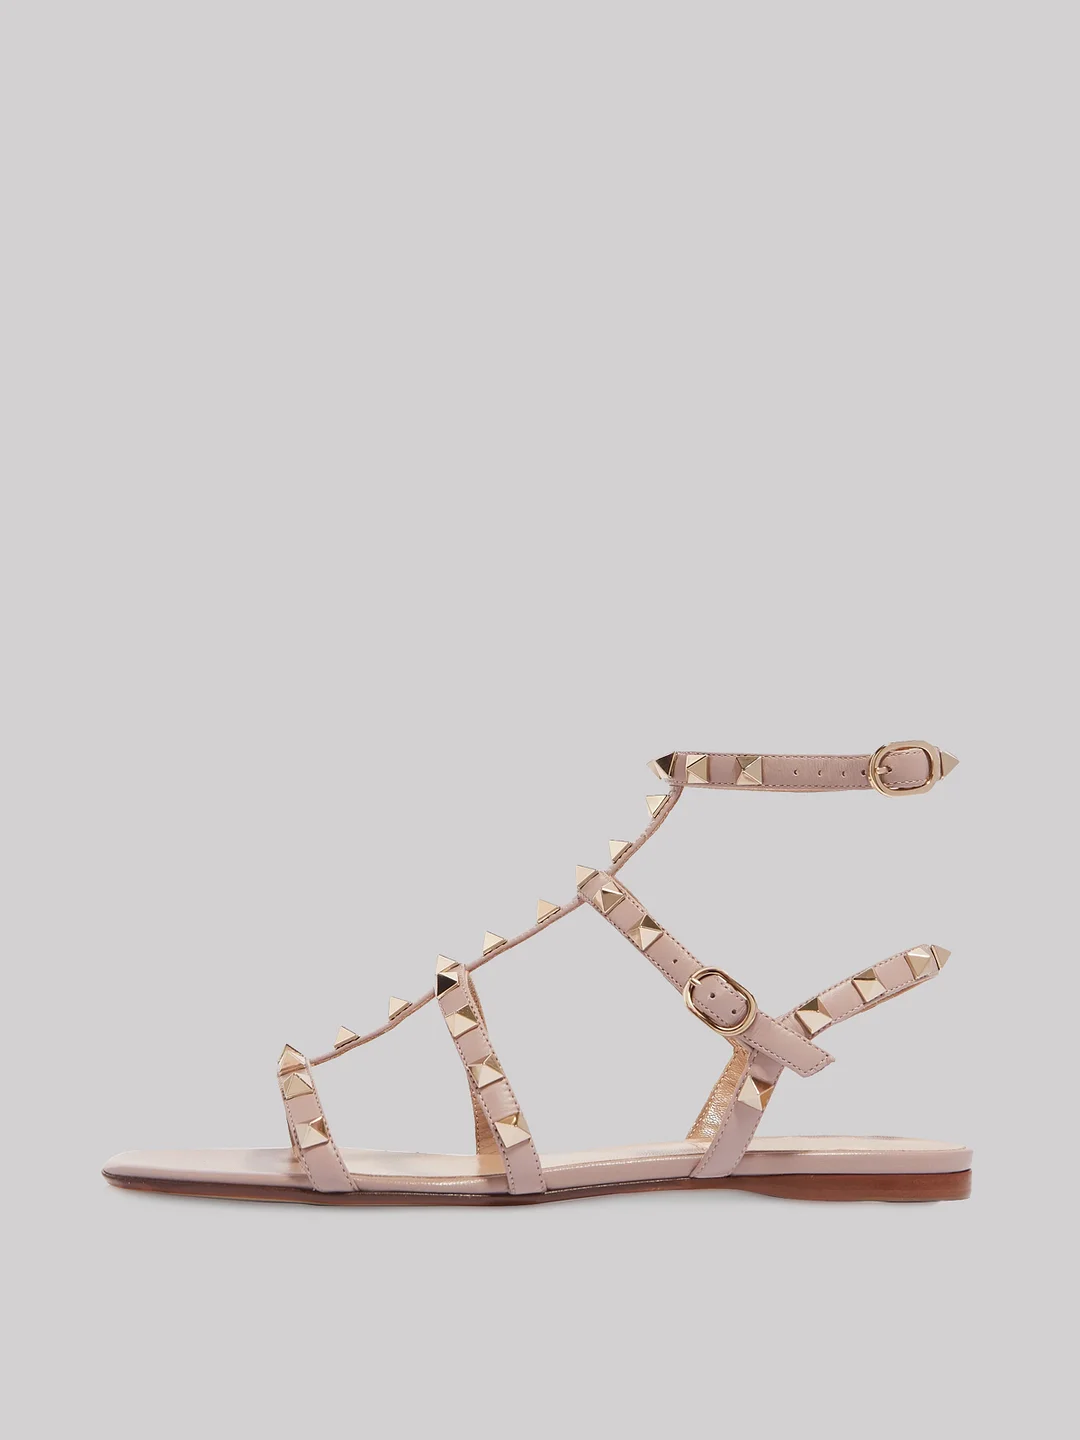 Women's Flats Sandals Classic Rockstud with Straps Slipper Summer Shoes